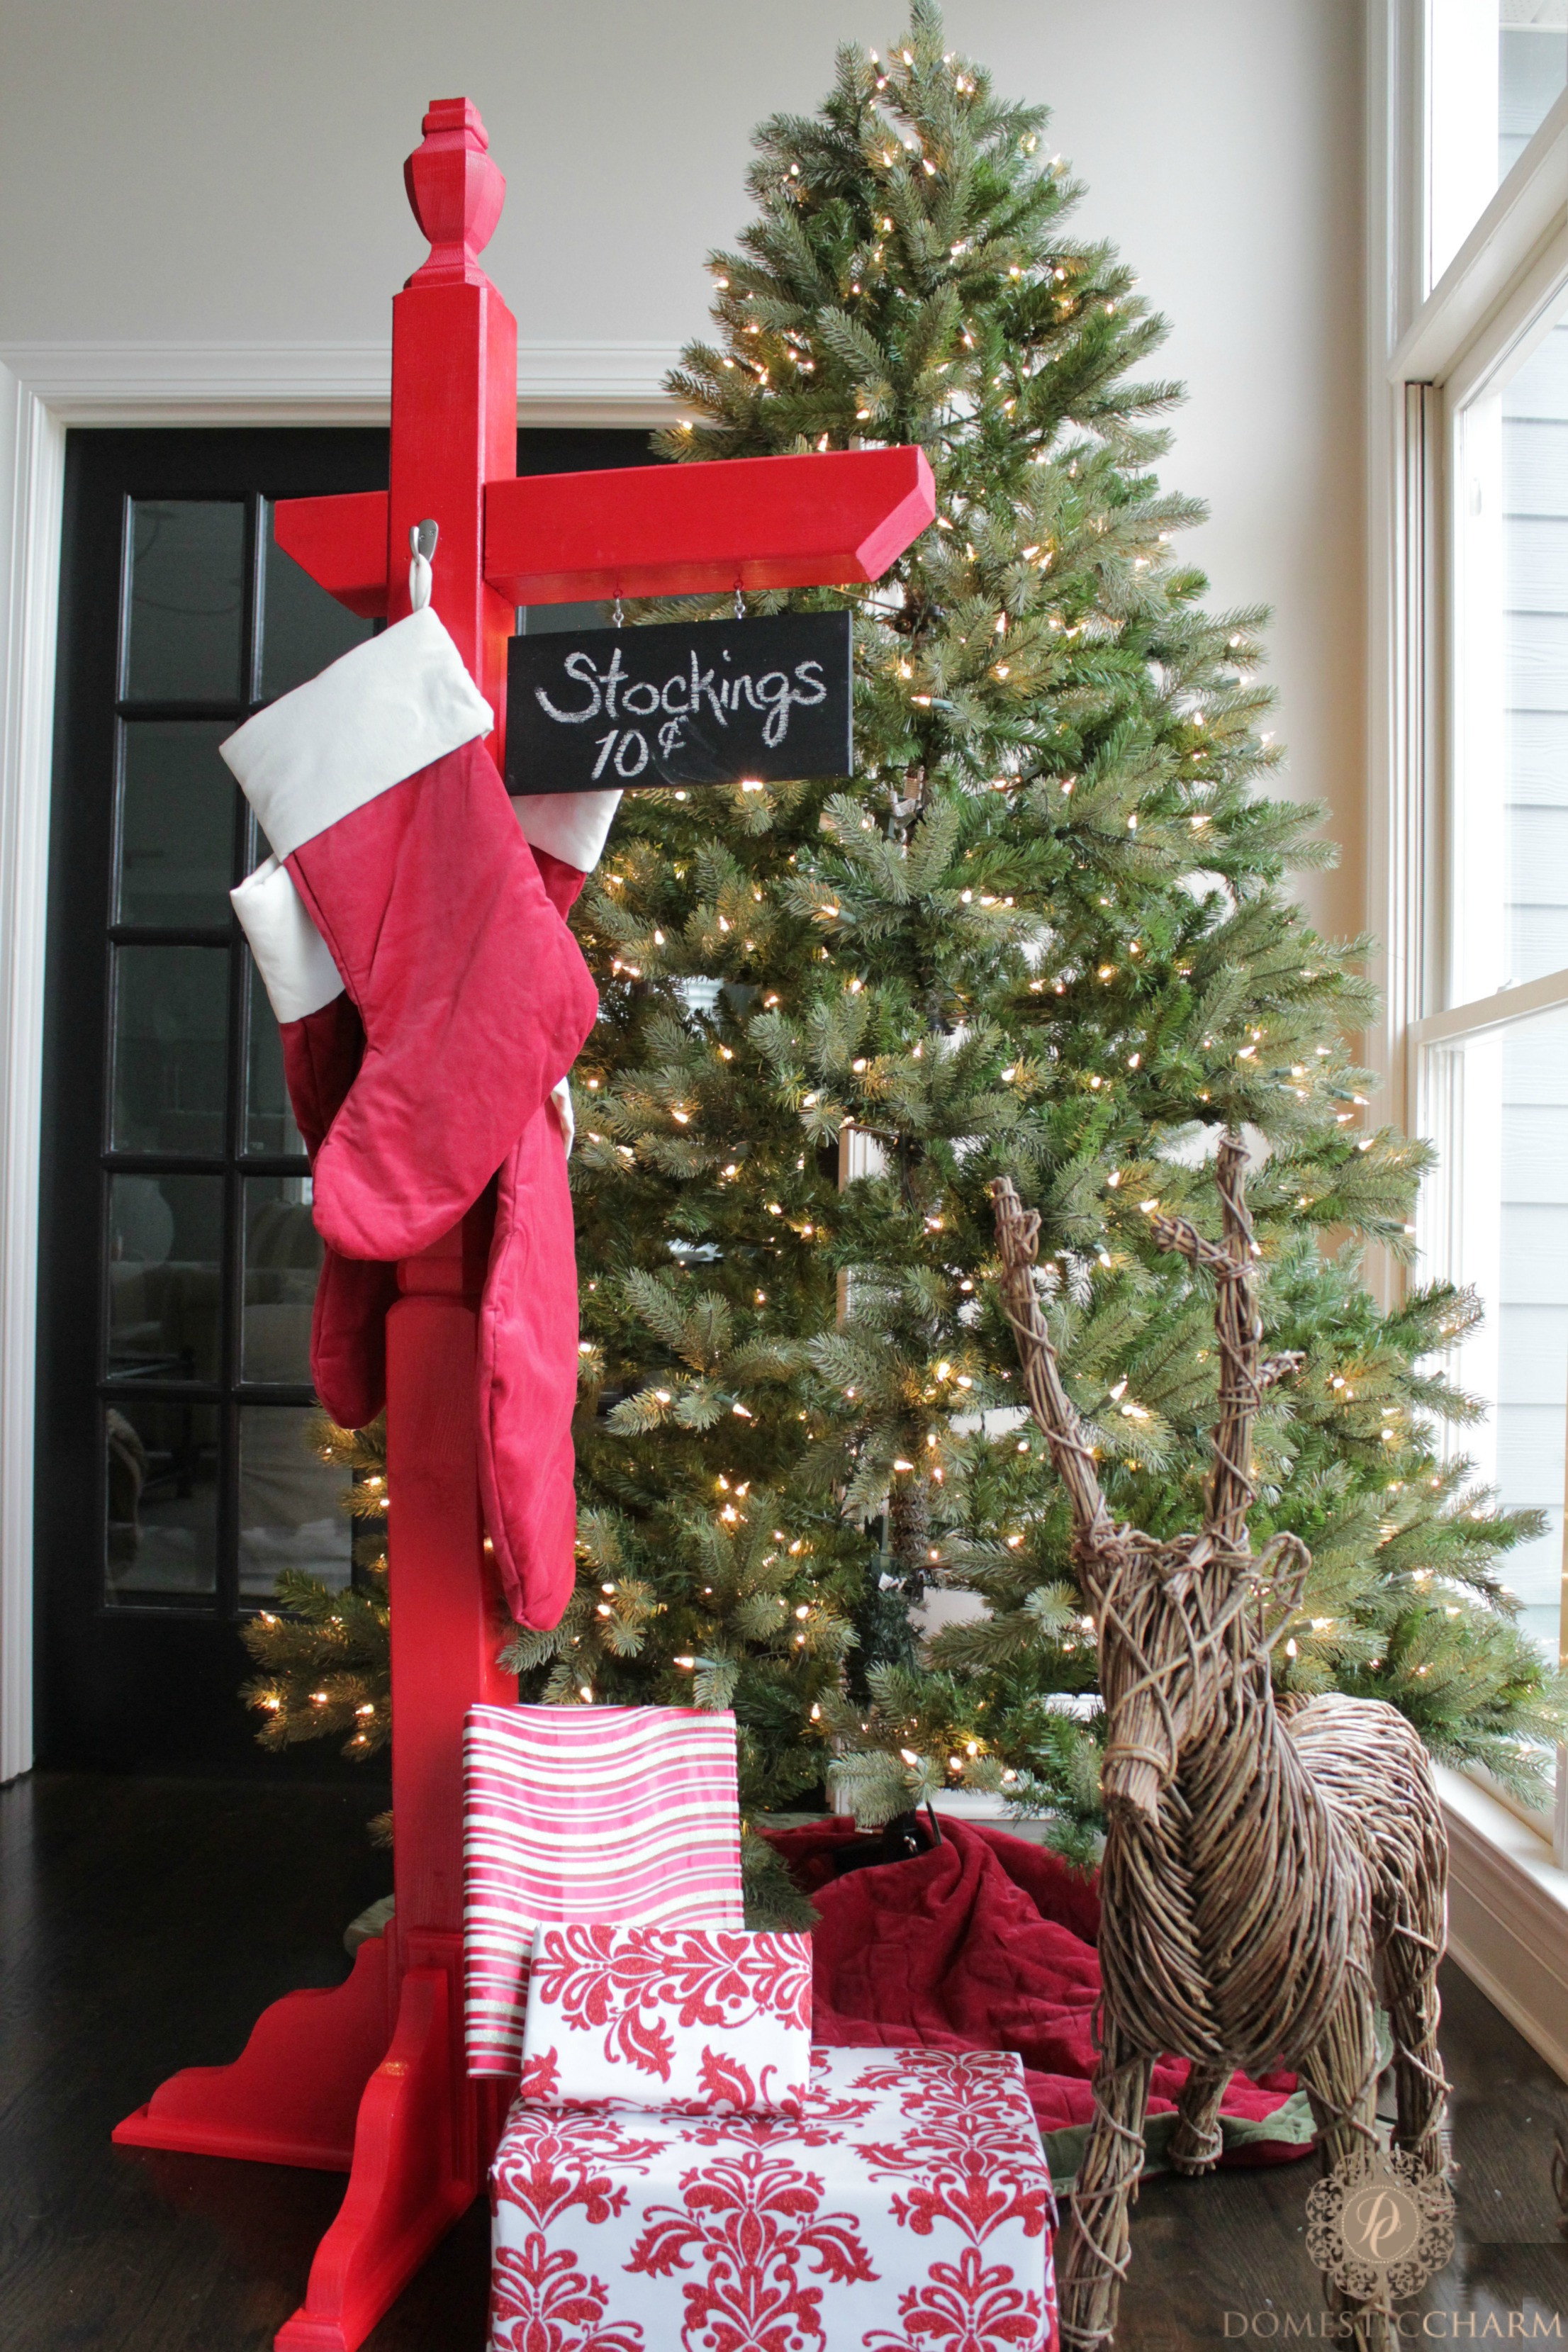 Floor Christmas Stocking Holder
 DIY Stocking Holder with The Home Depot Domestic Charm